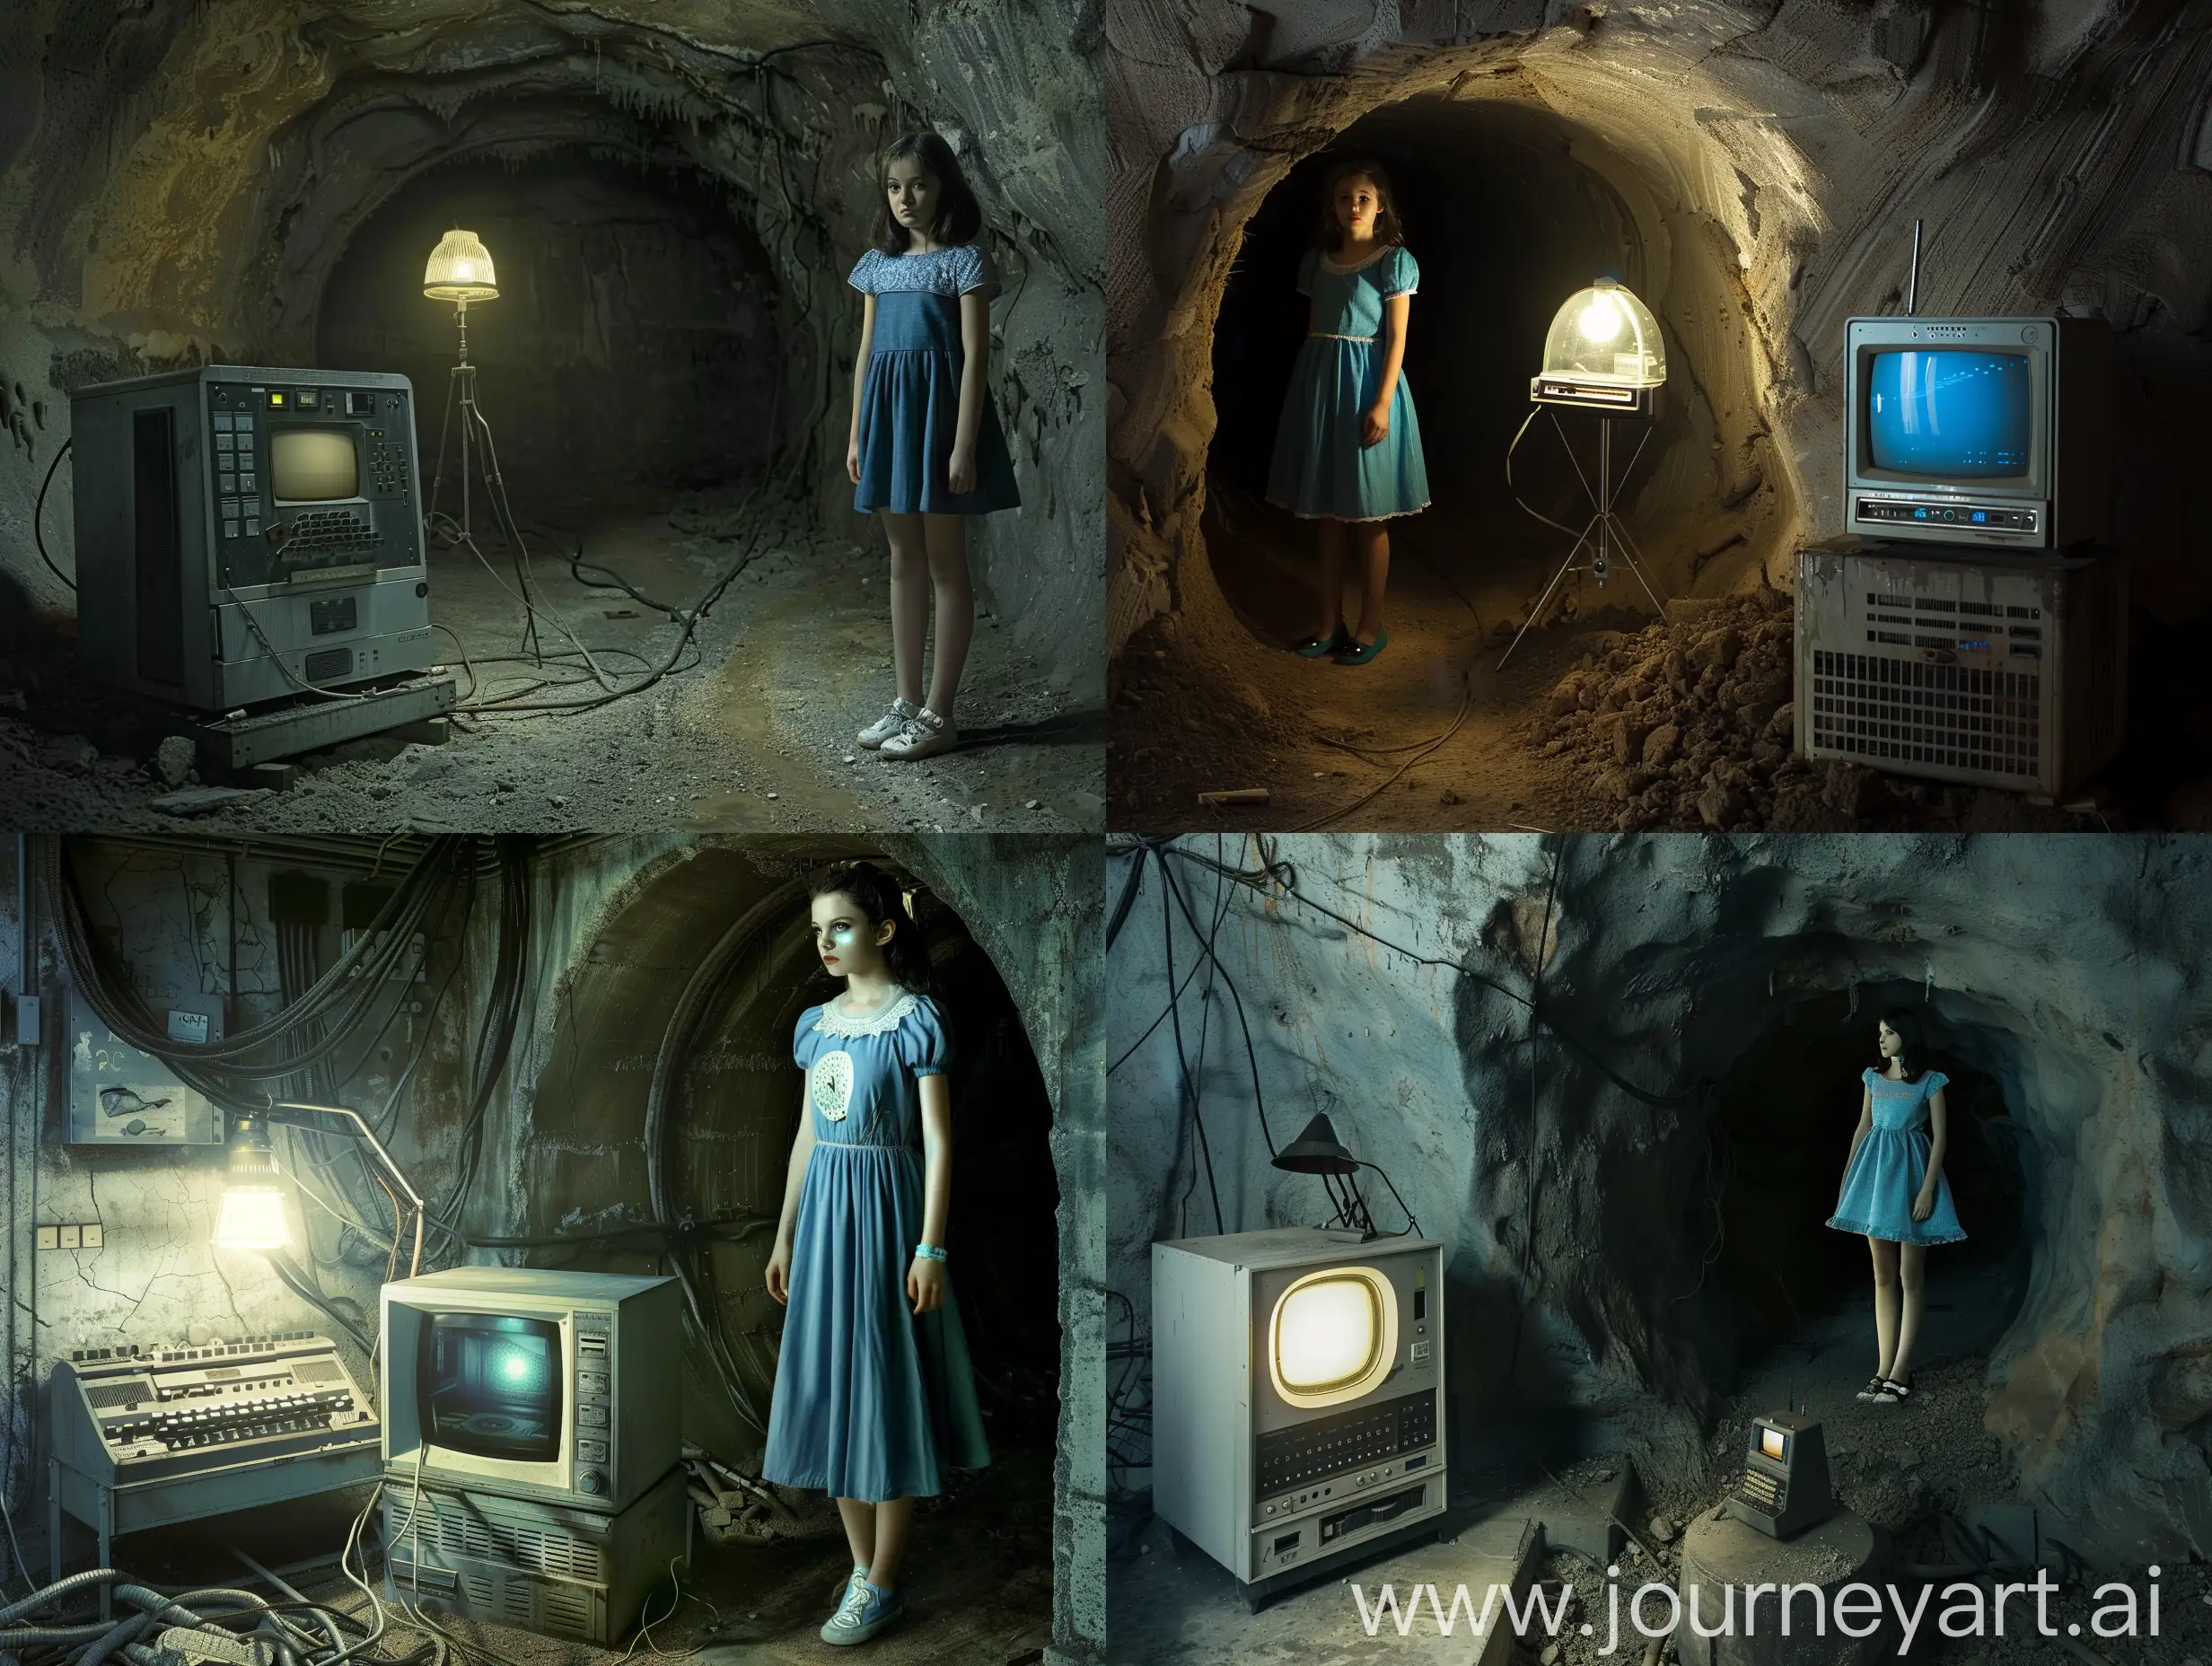 a dark bunker in the center, a light and an old work computer, and next to it a full-length adult girl in a blue dress